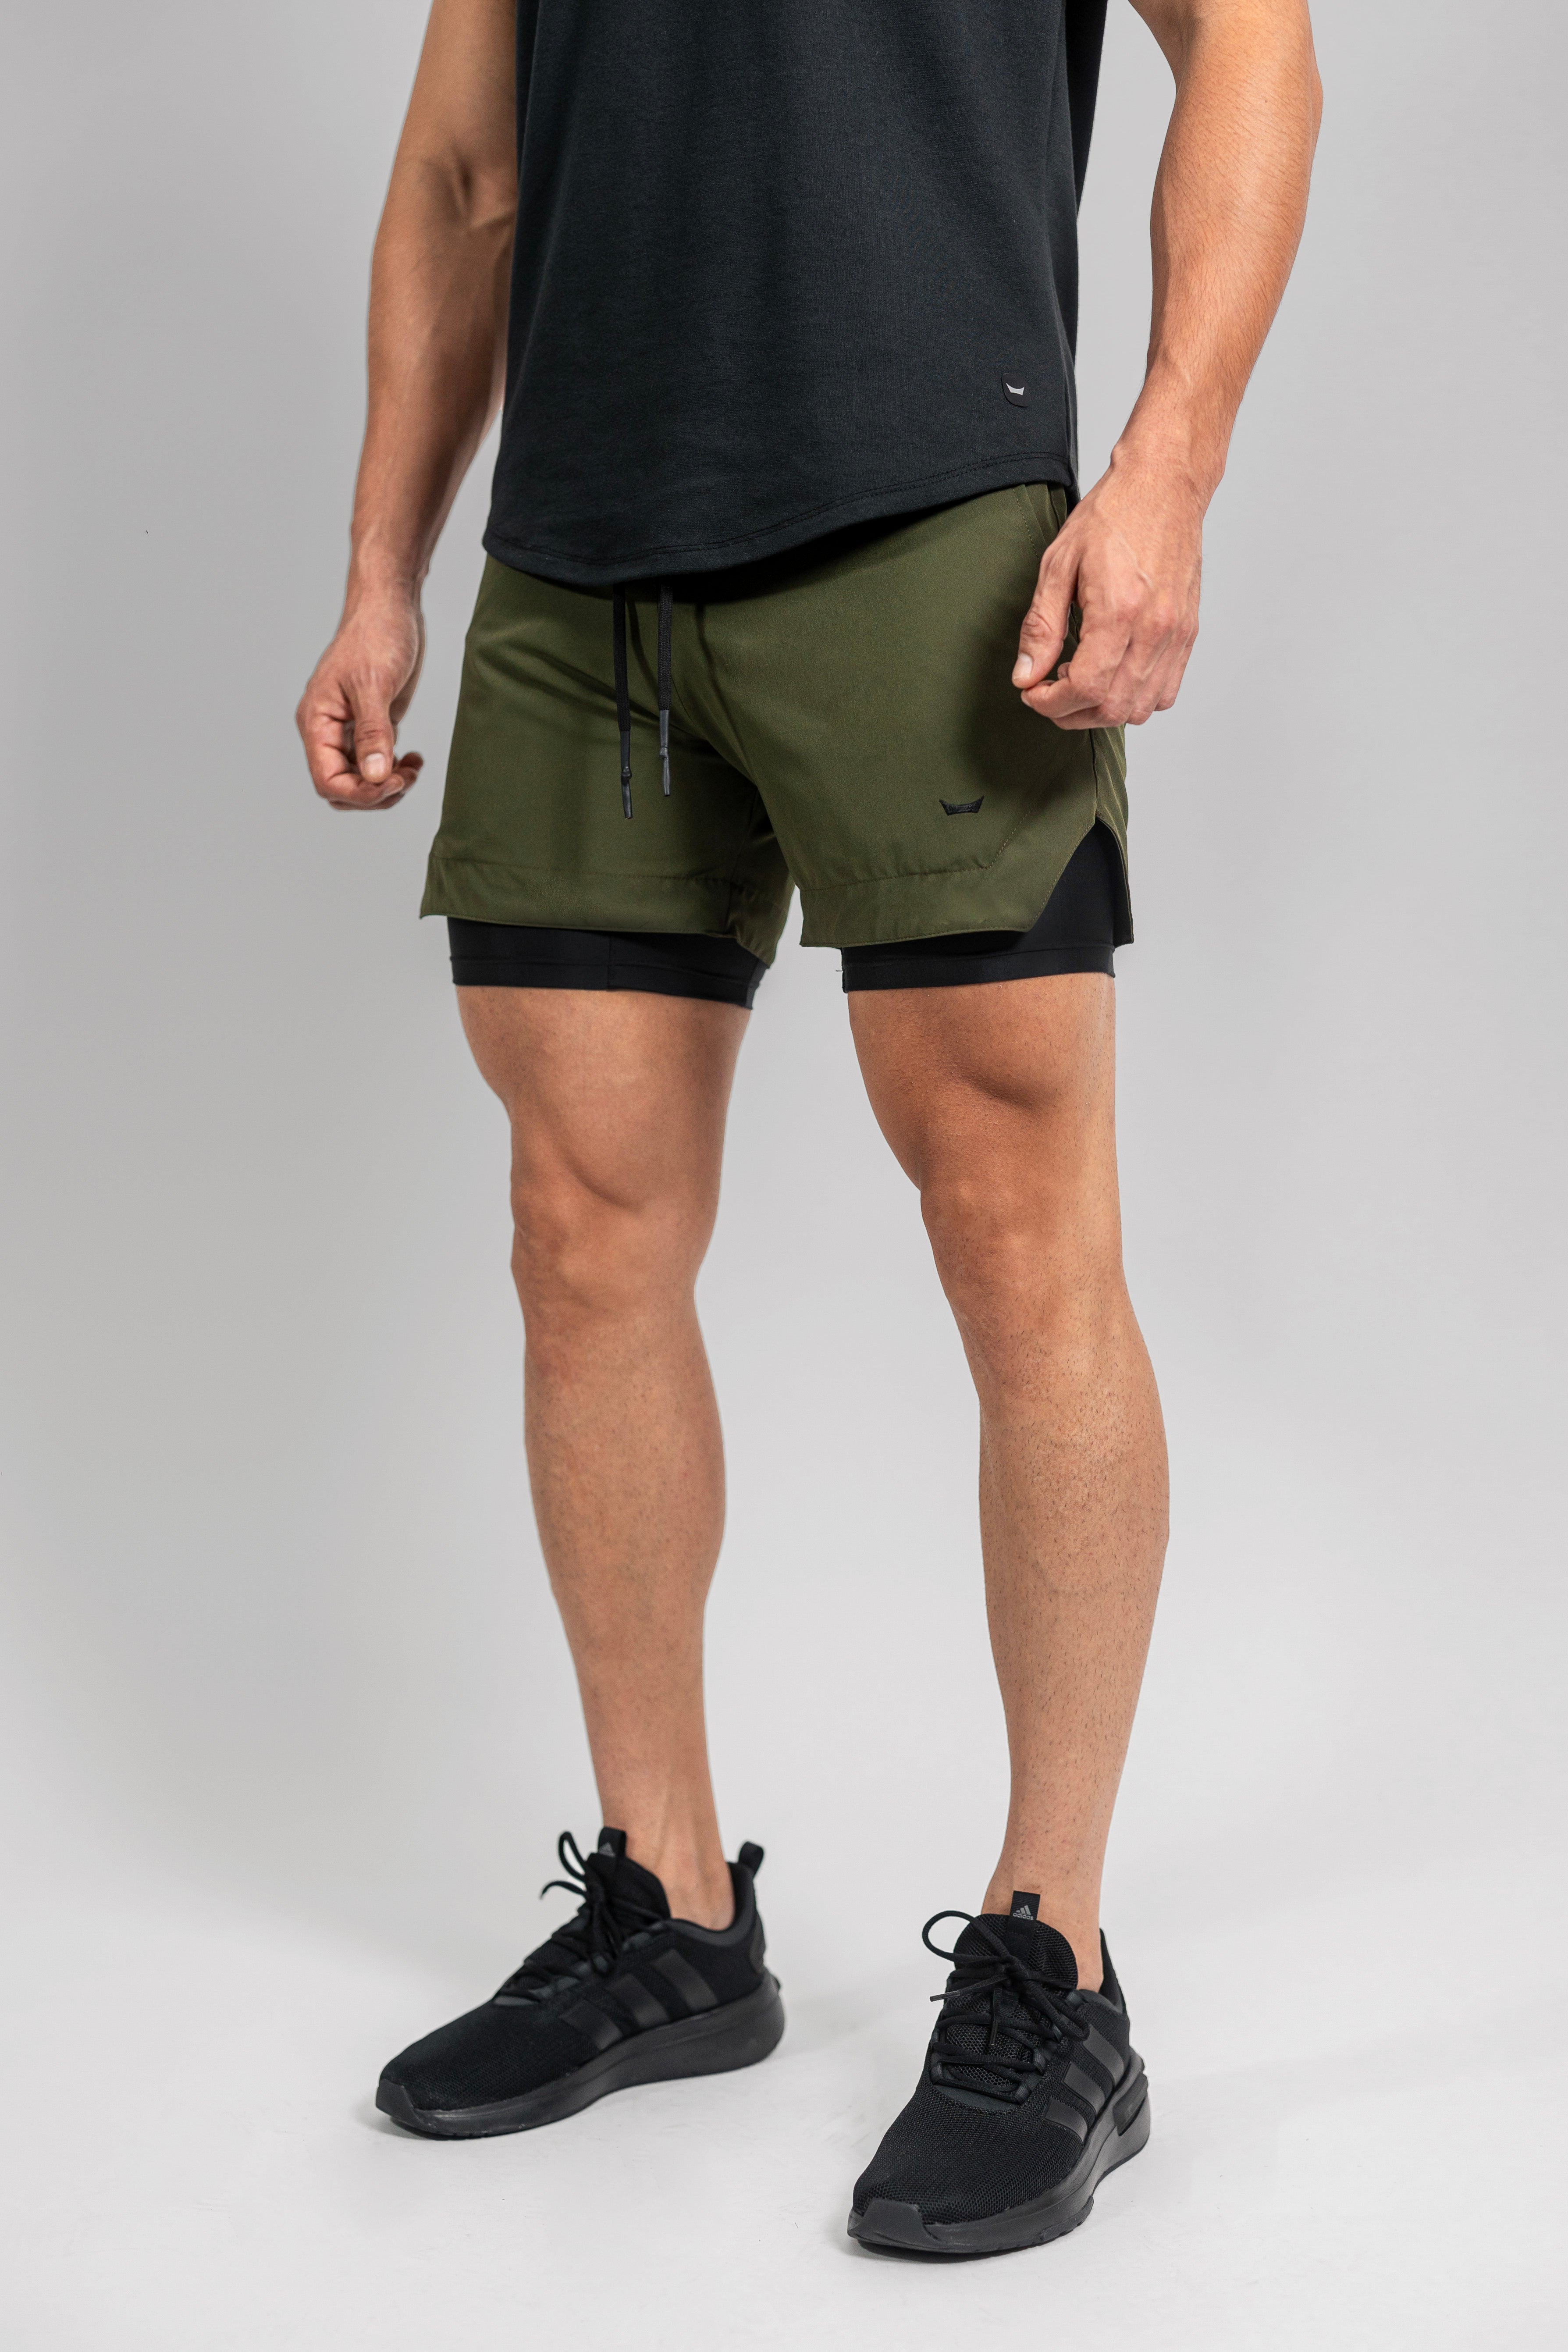 Performance Shorts 4.0 - Army Green